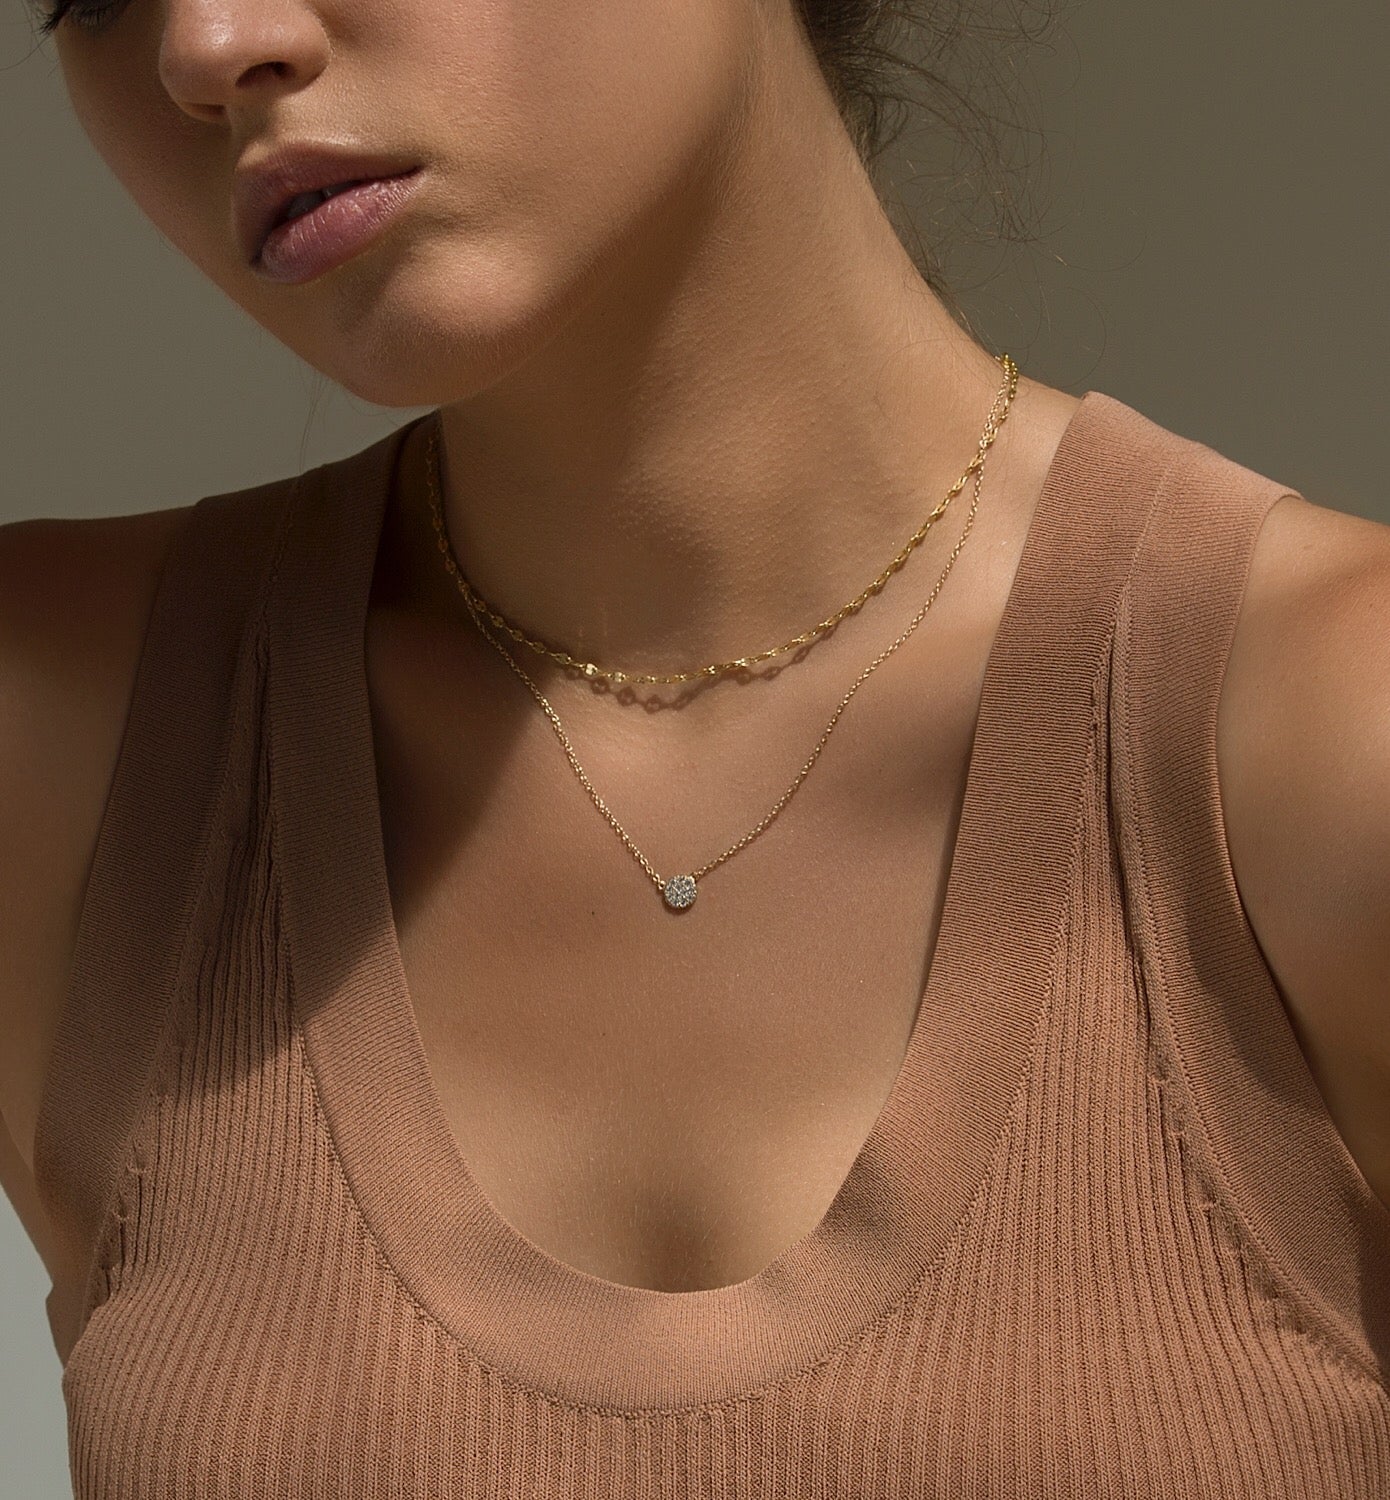 Gold Choker Necklace, Dainty Layered Choker for Women, Layered Necklace